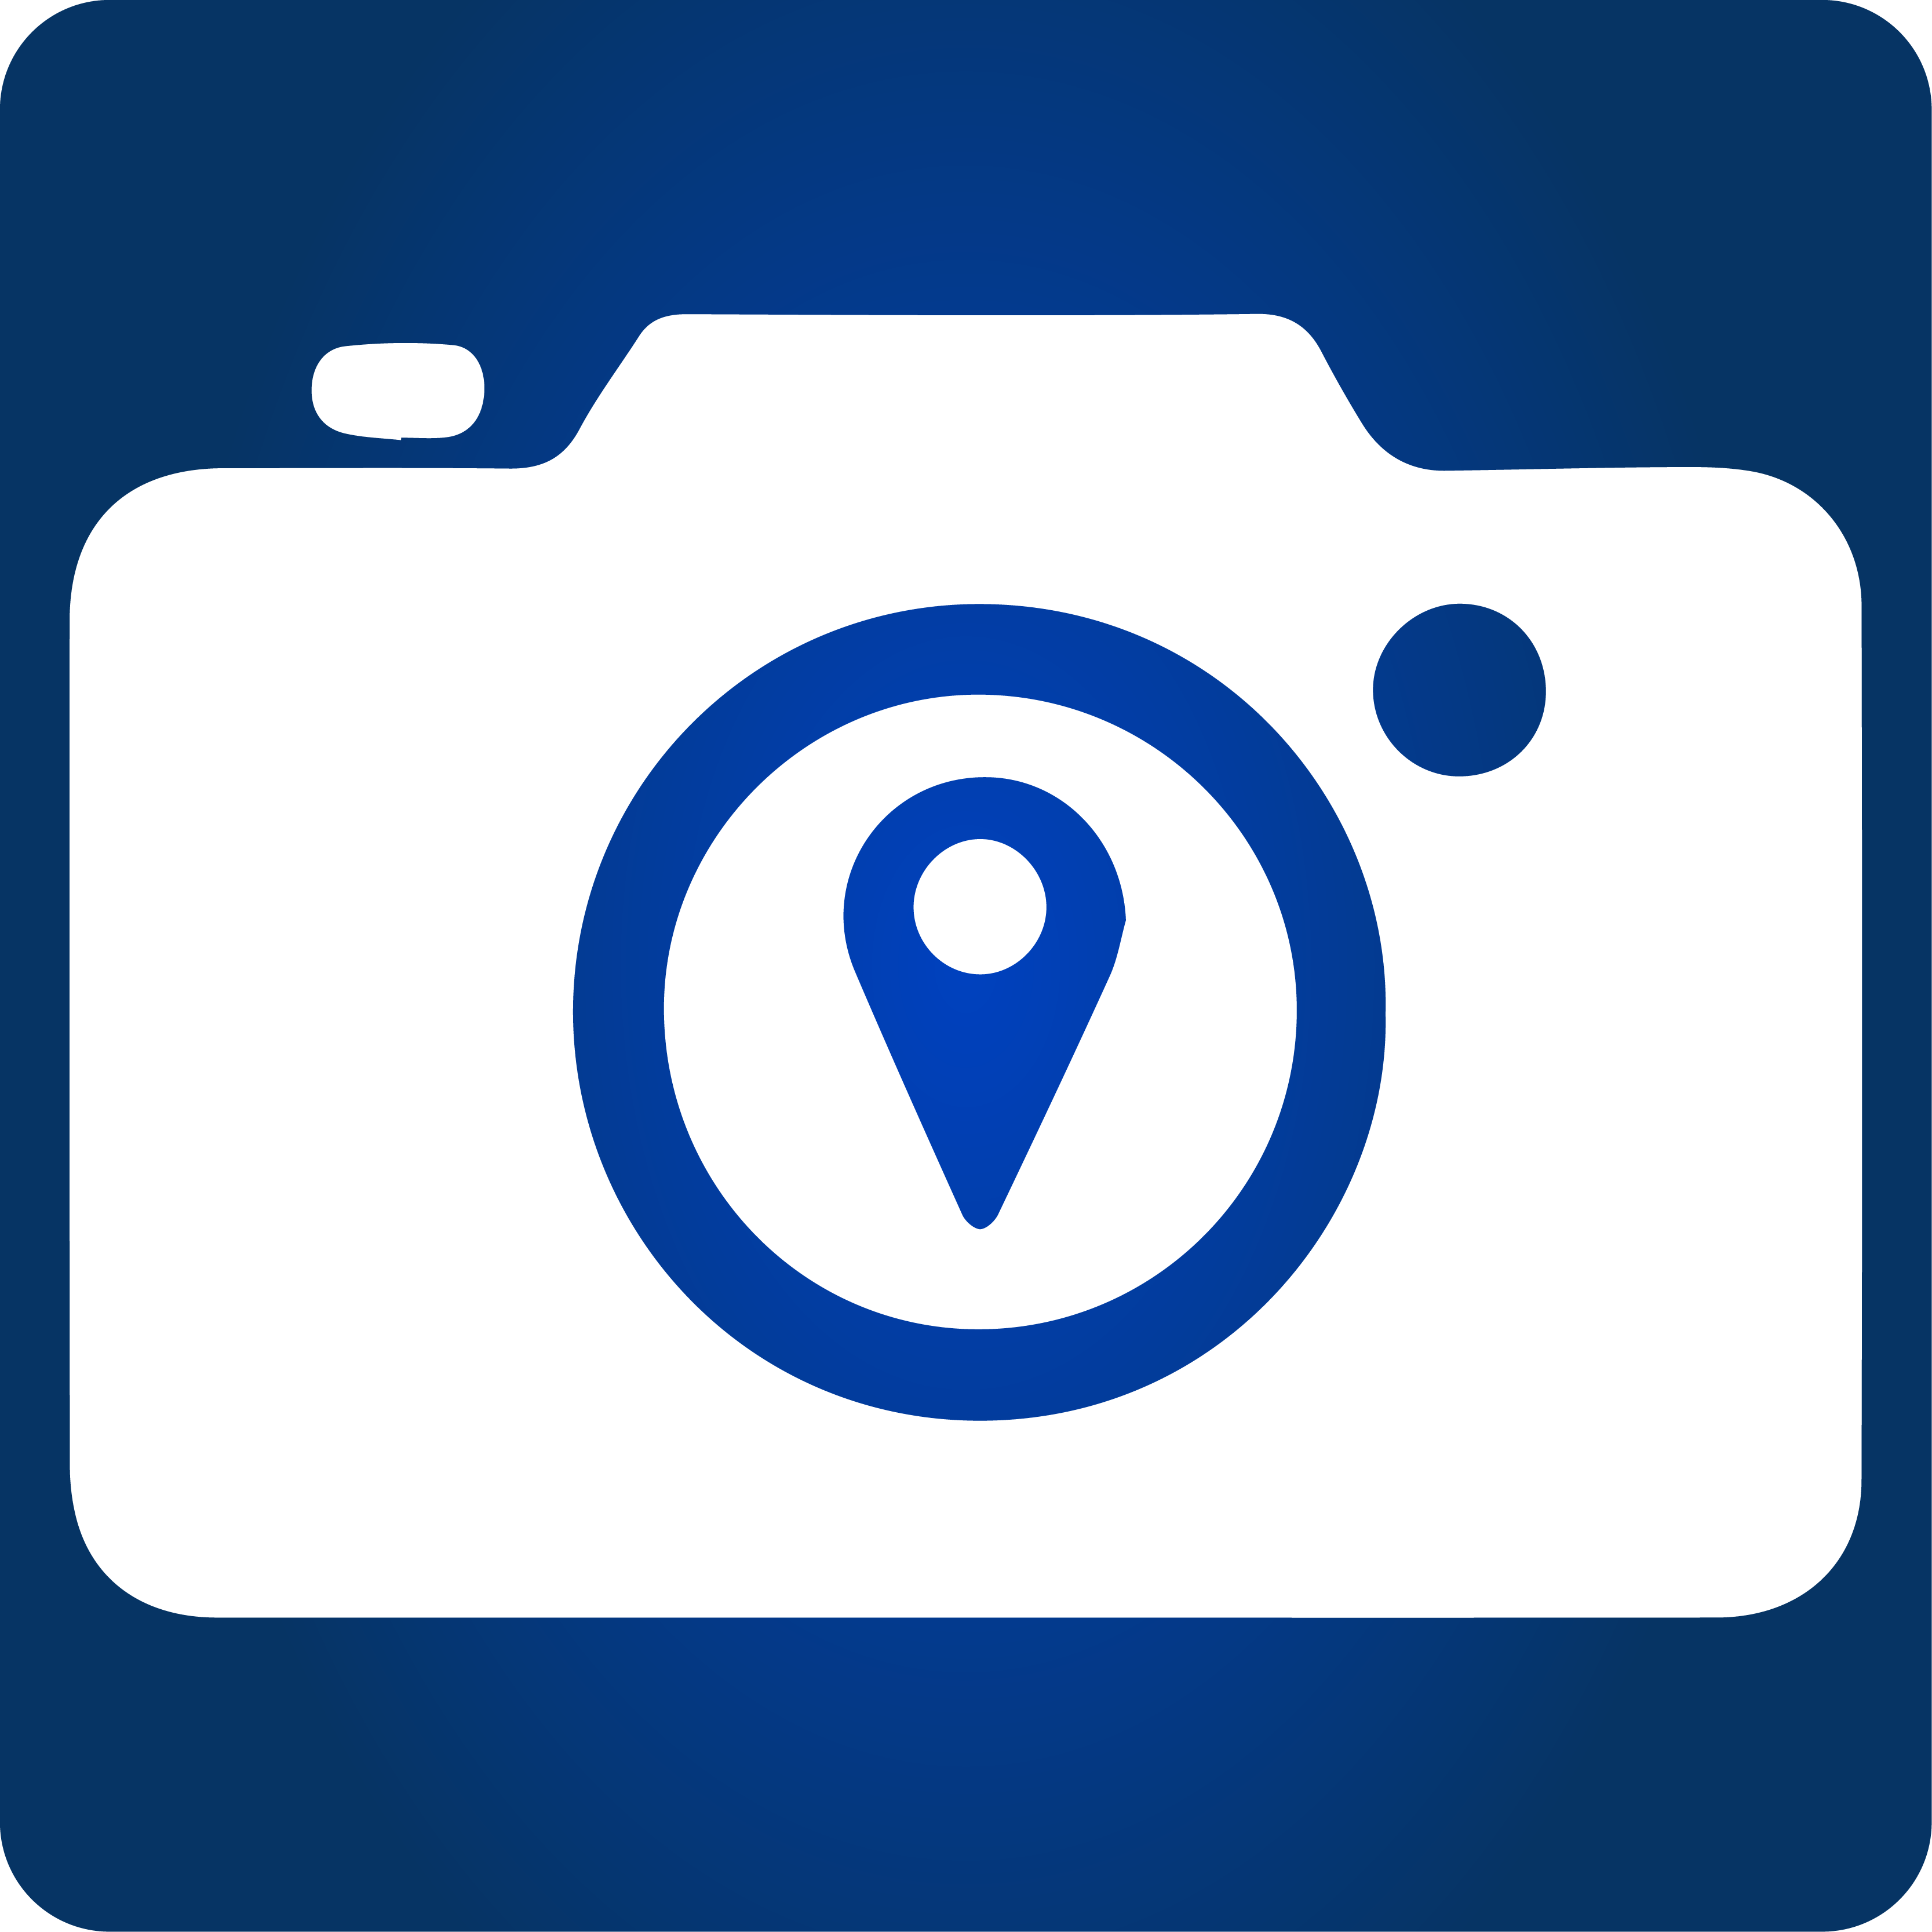 GeoTakCam - a icon of a camera with a map marker in the lens.